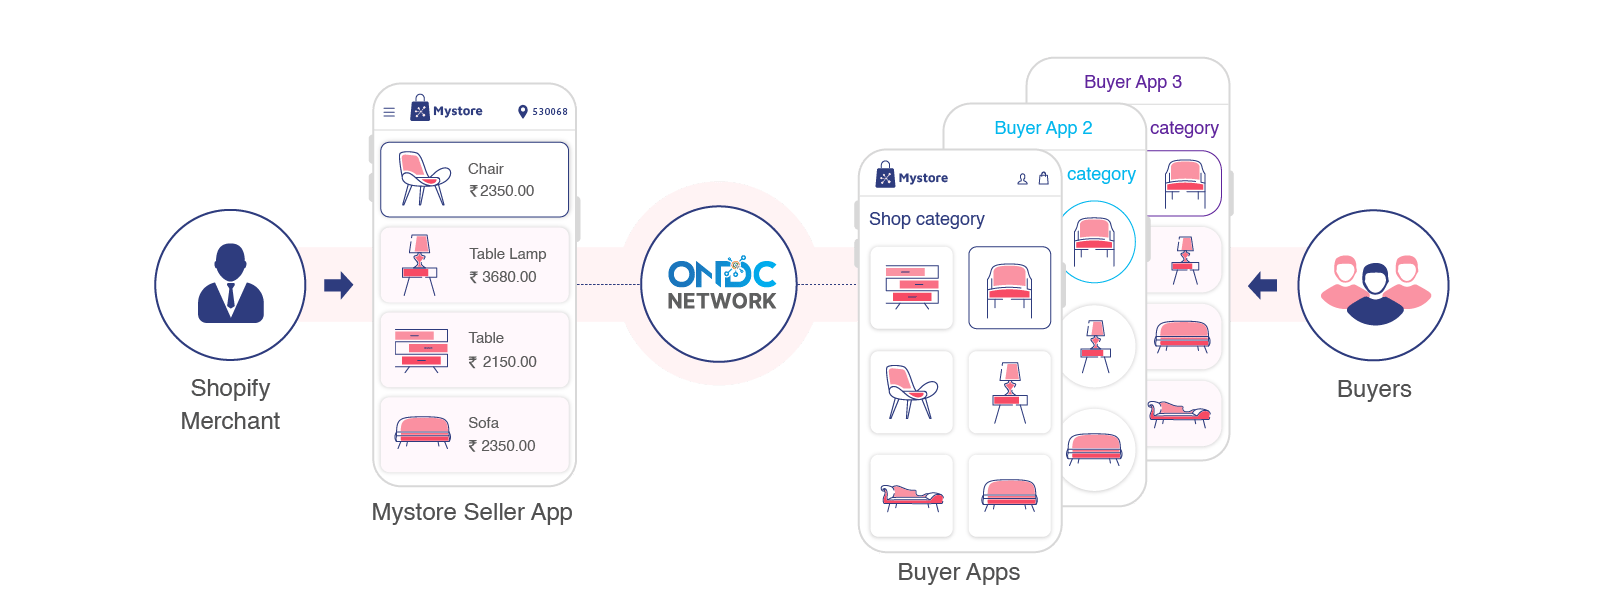 How ONDC Network works for Shopify Merchants